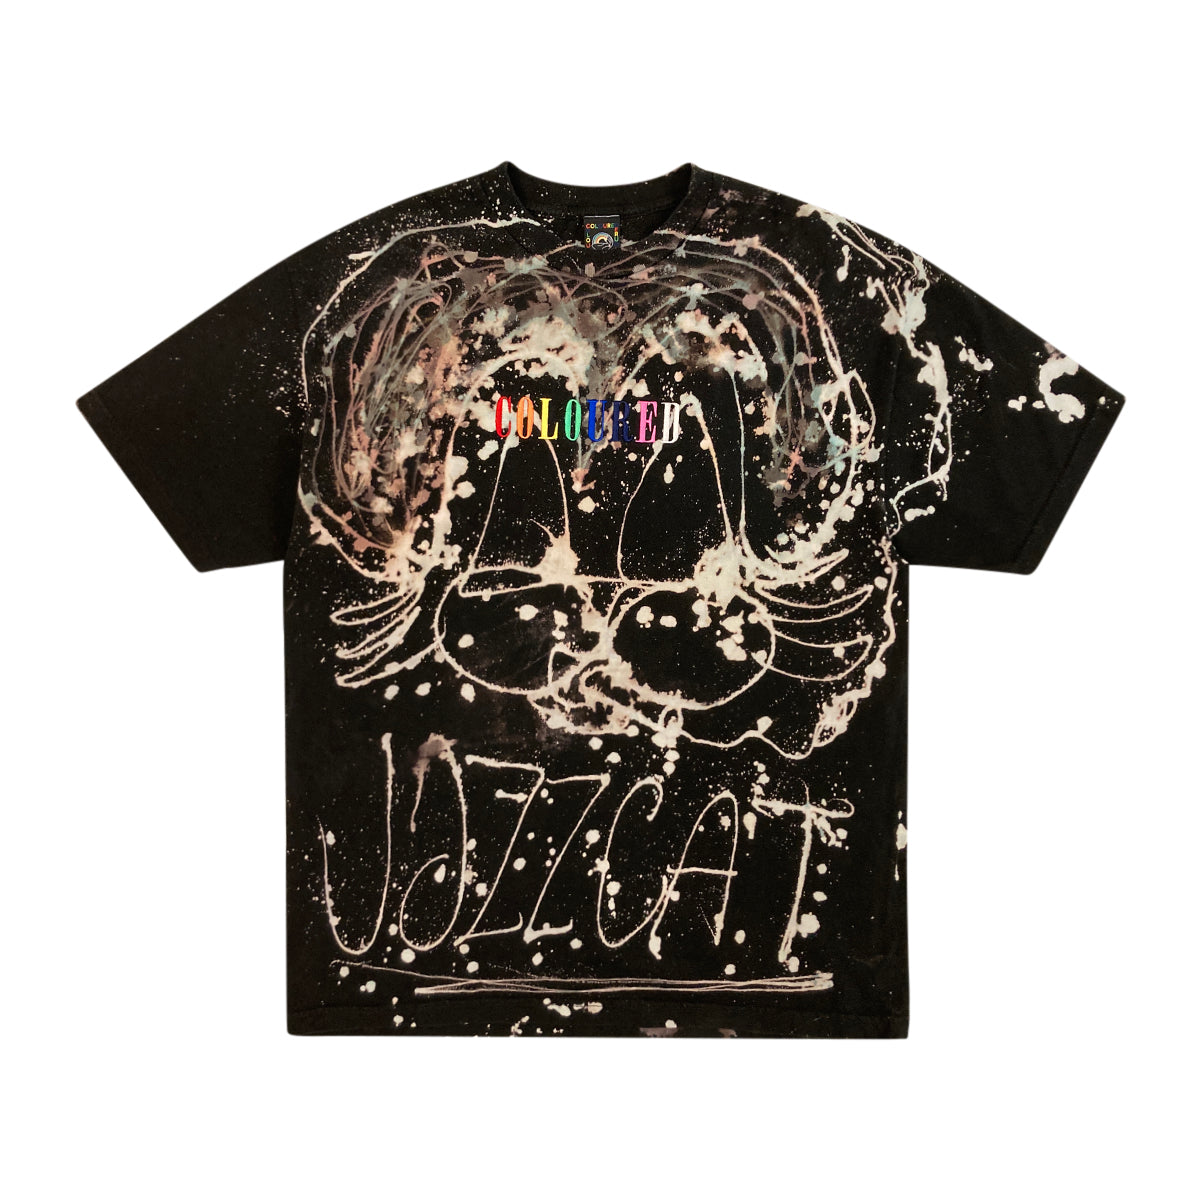 An image of a black t-shirt with bleached and dyed cat and "JAZZCAT" written below, and "COLOURED" embroidered in rainbow colors.